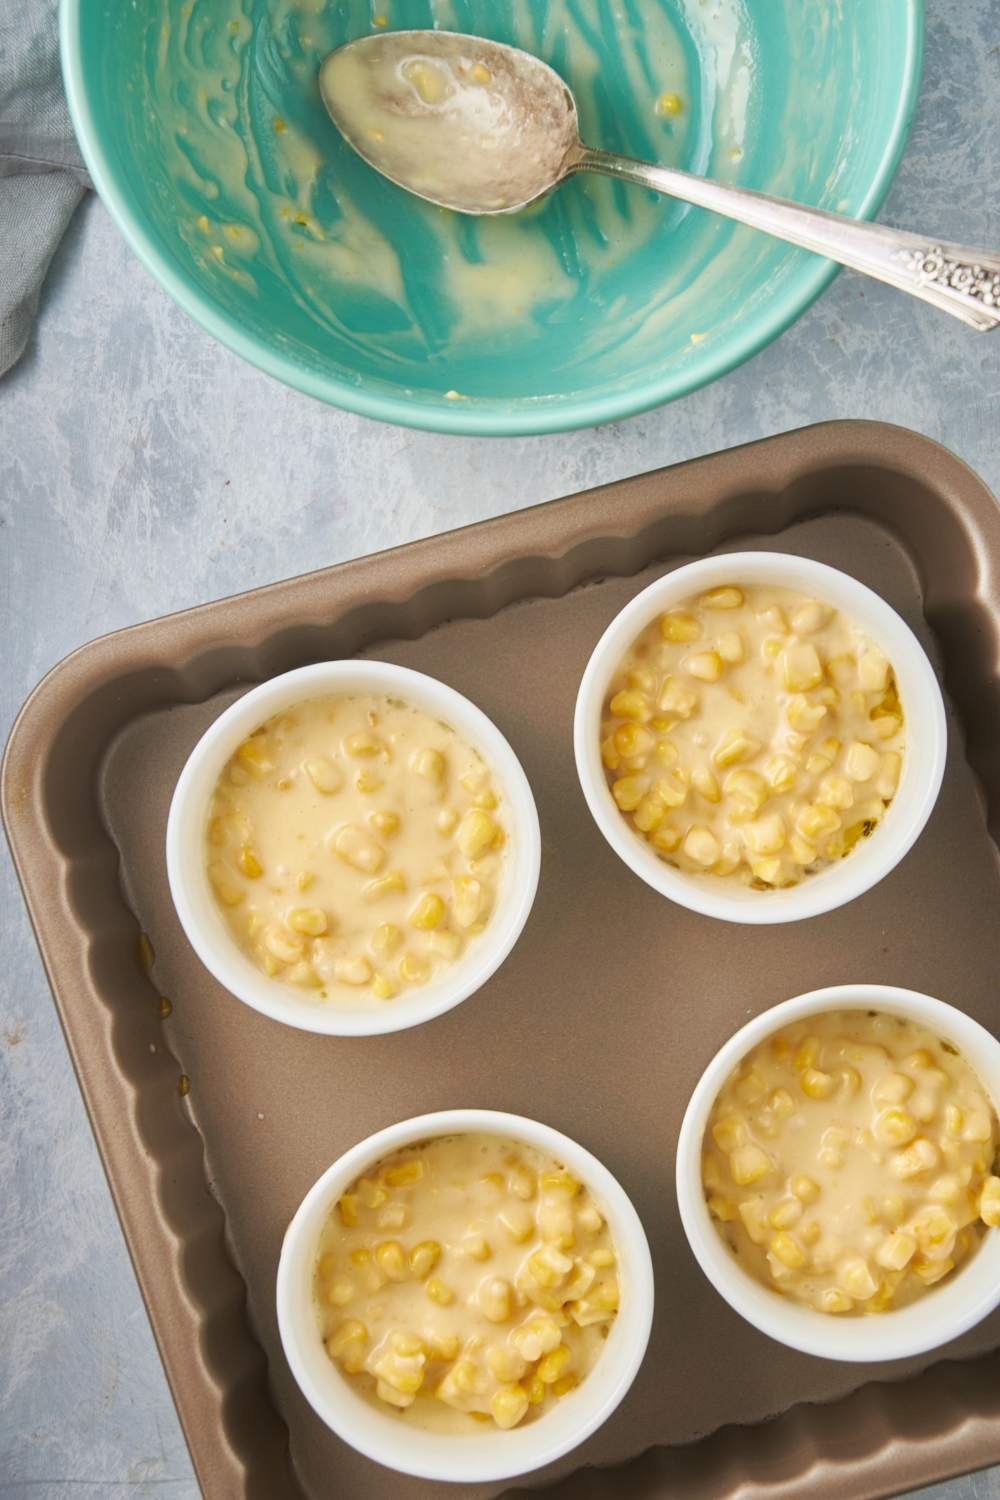 Four ramekins placed in a baking dish and evenly filled with unbaked corn pudding casserole.